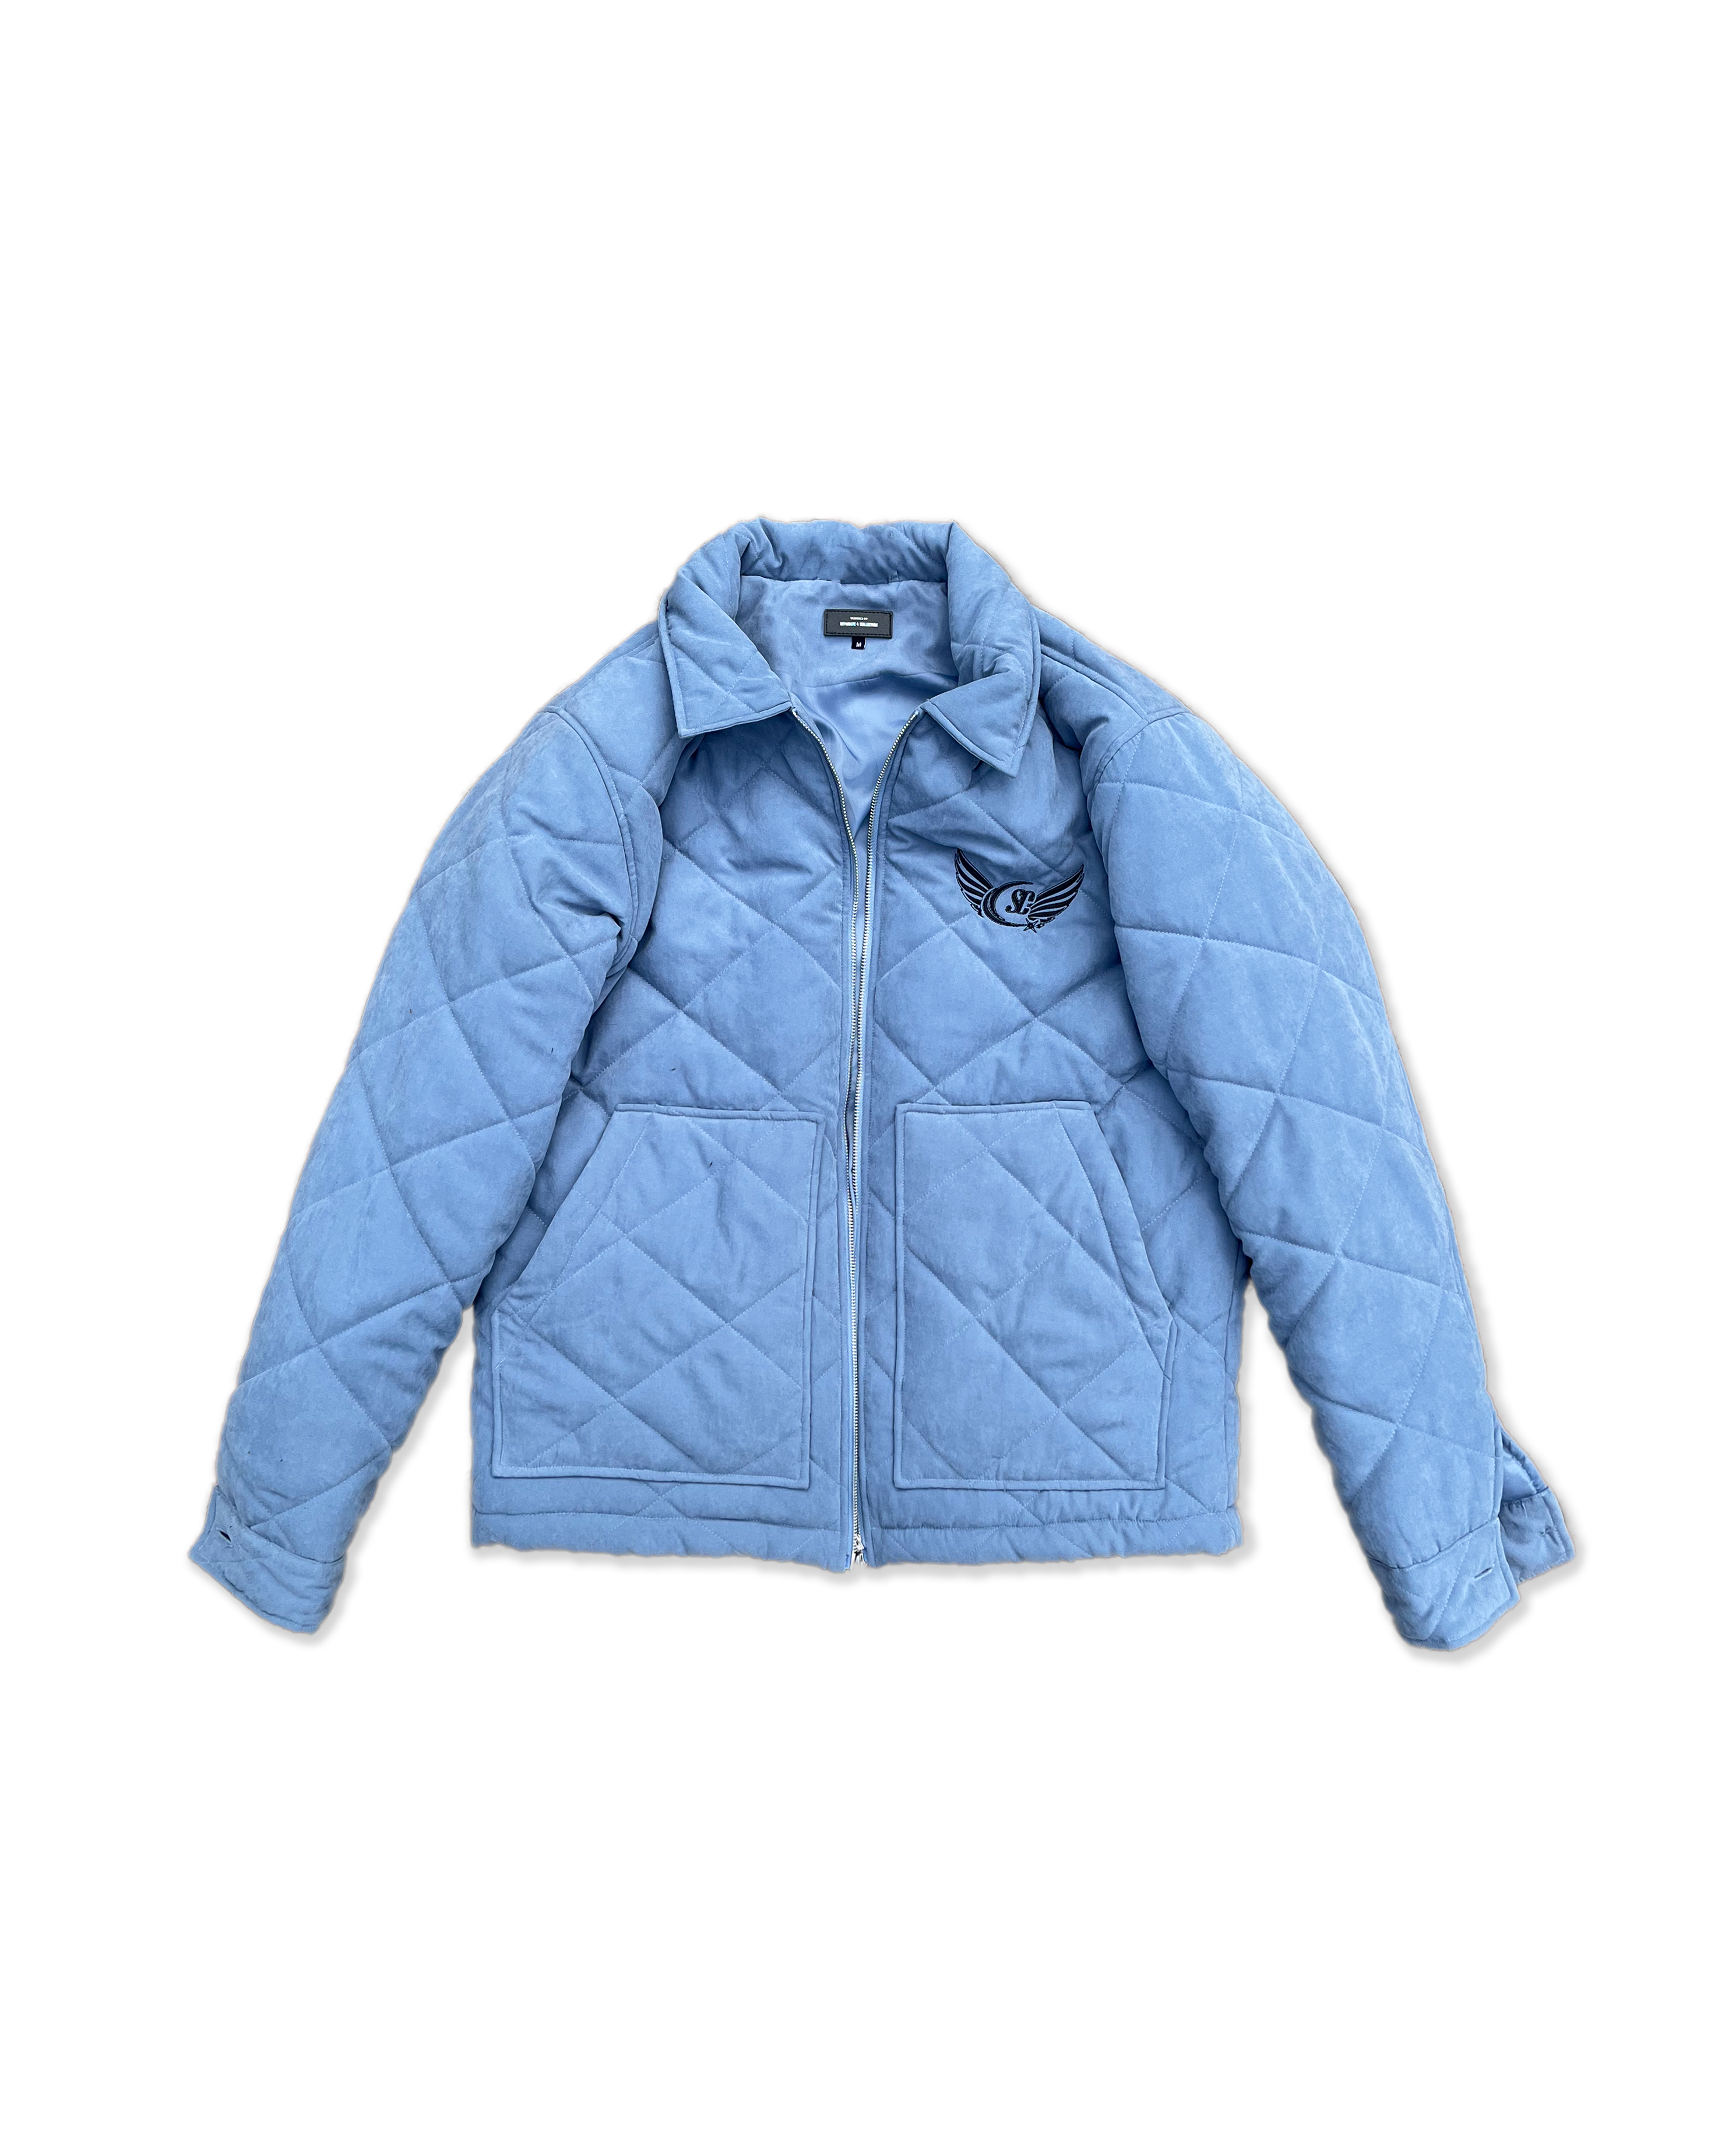 SC Quilted Jacket Sample